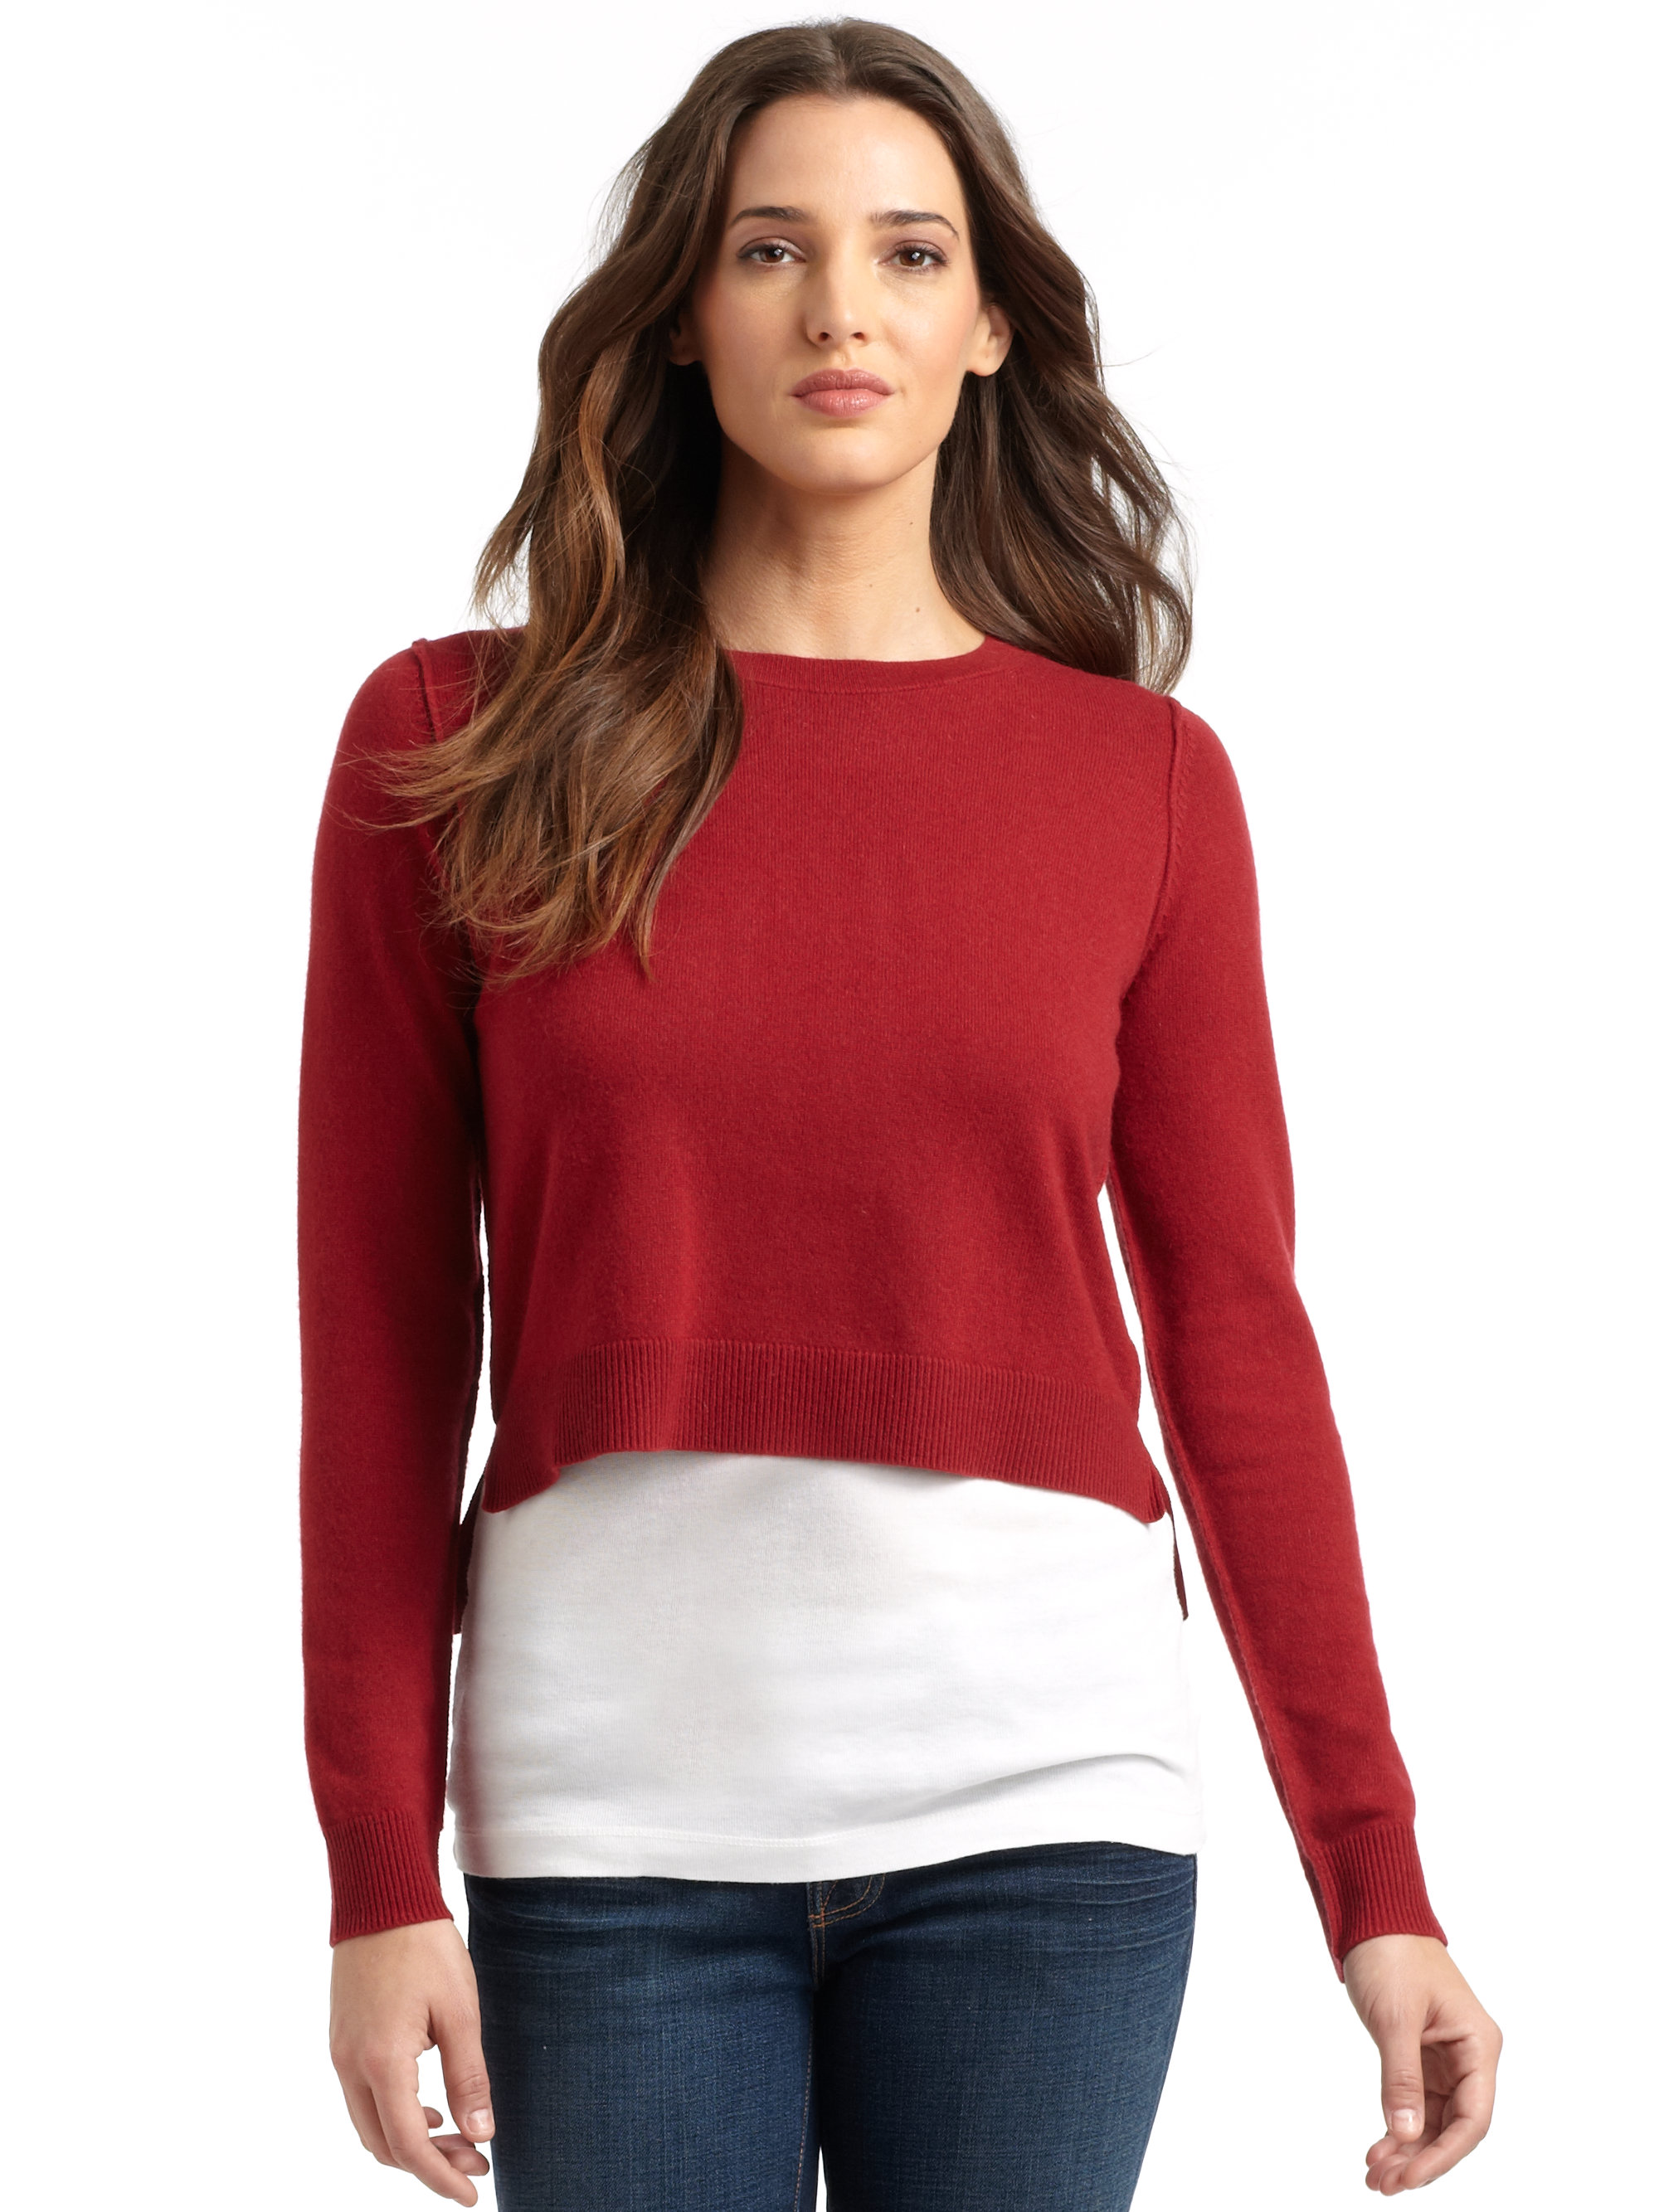 Autumn cashmere Cashmere Cropped Hilo Sweater in Red | Lyst